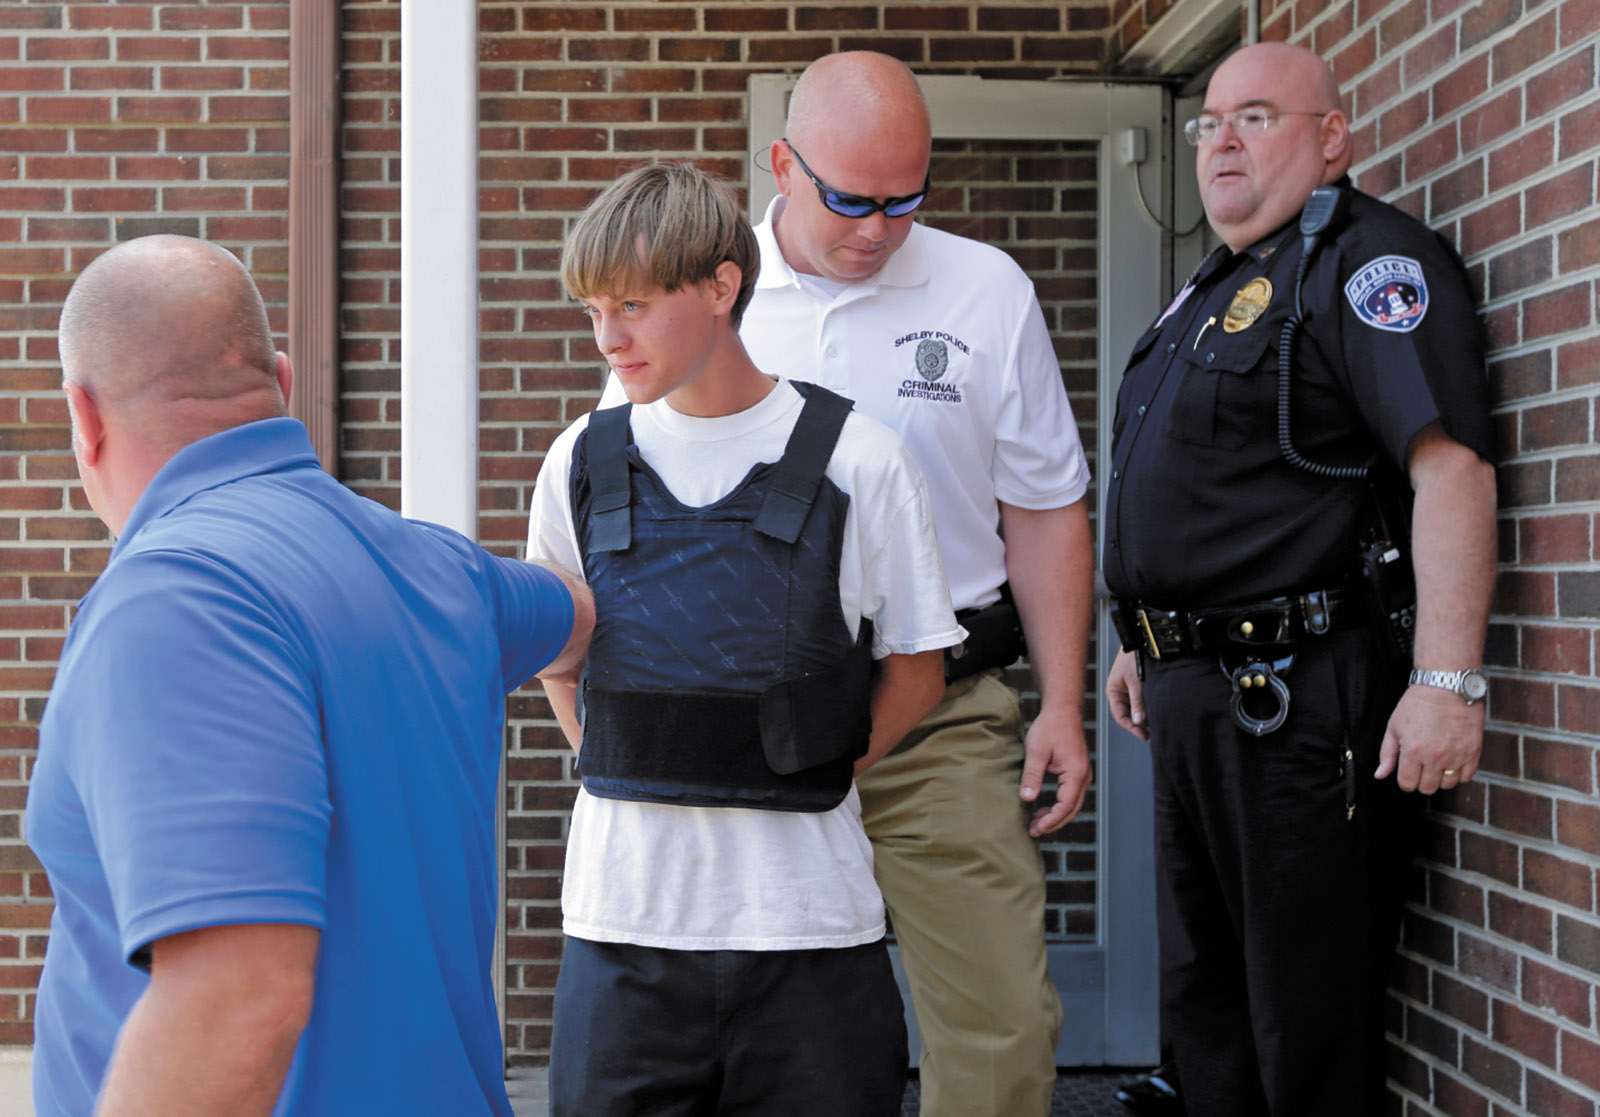 Dylann Roof being escorted from the Shelby Police Department after his arrest, Shelby, North Carolina, June 2015